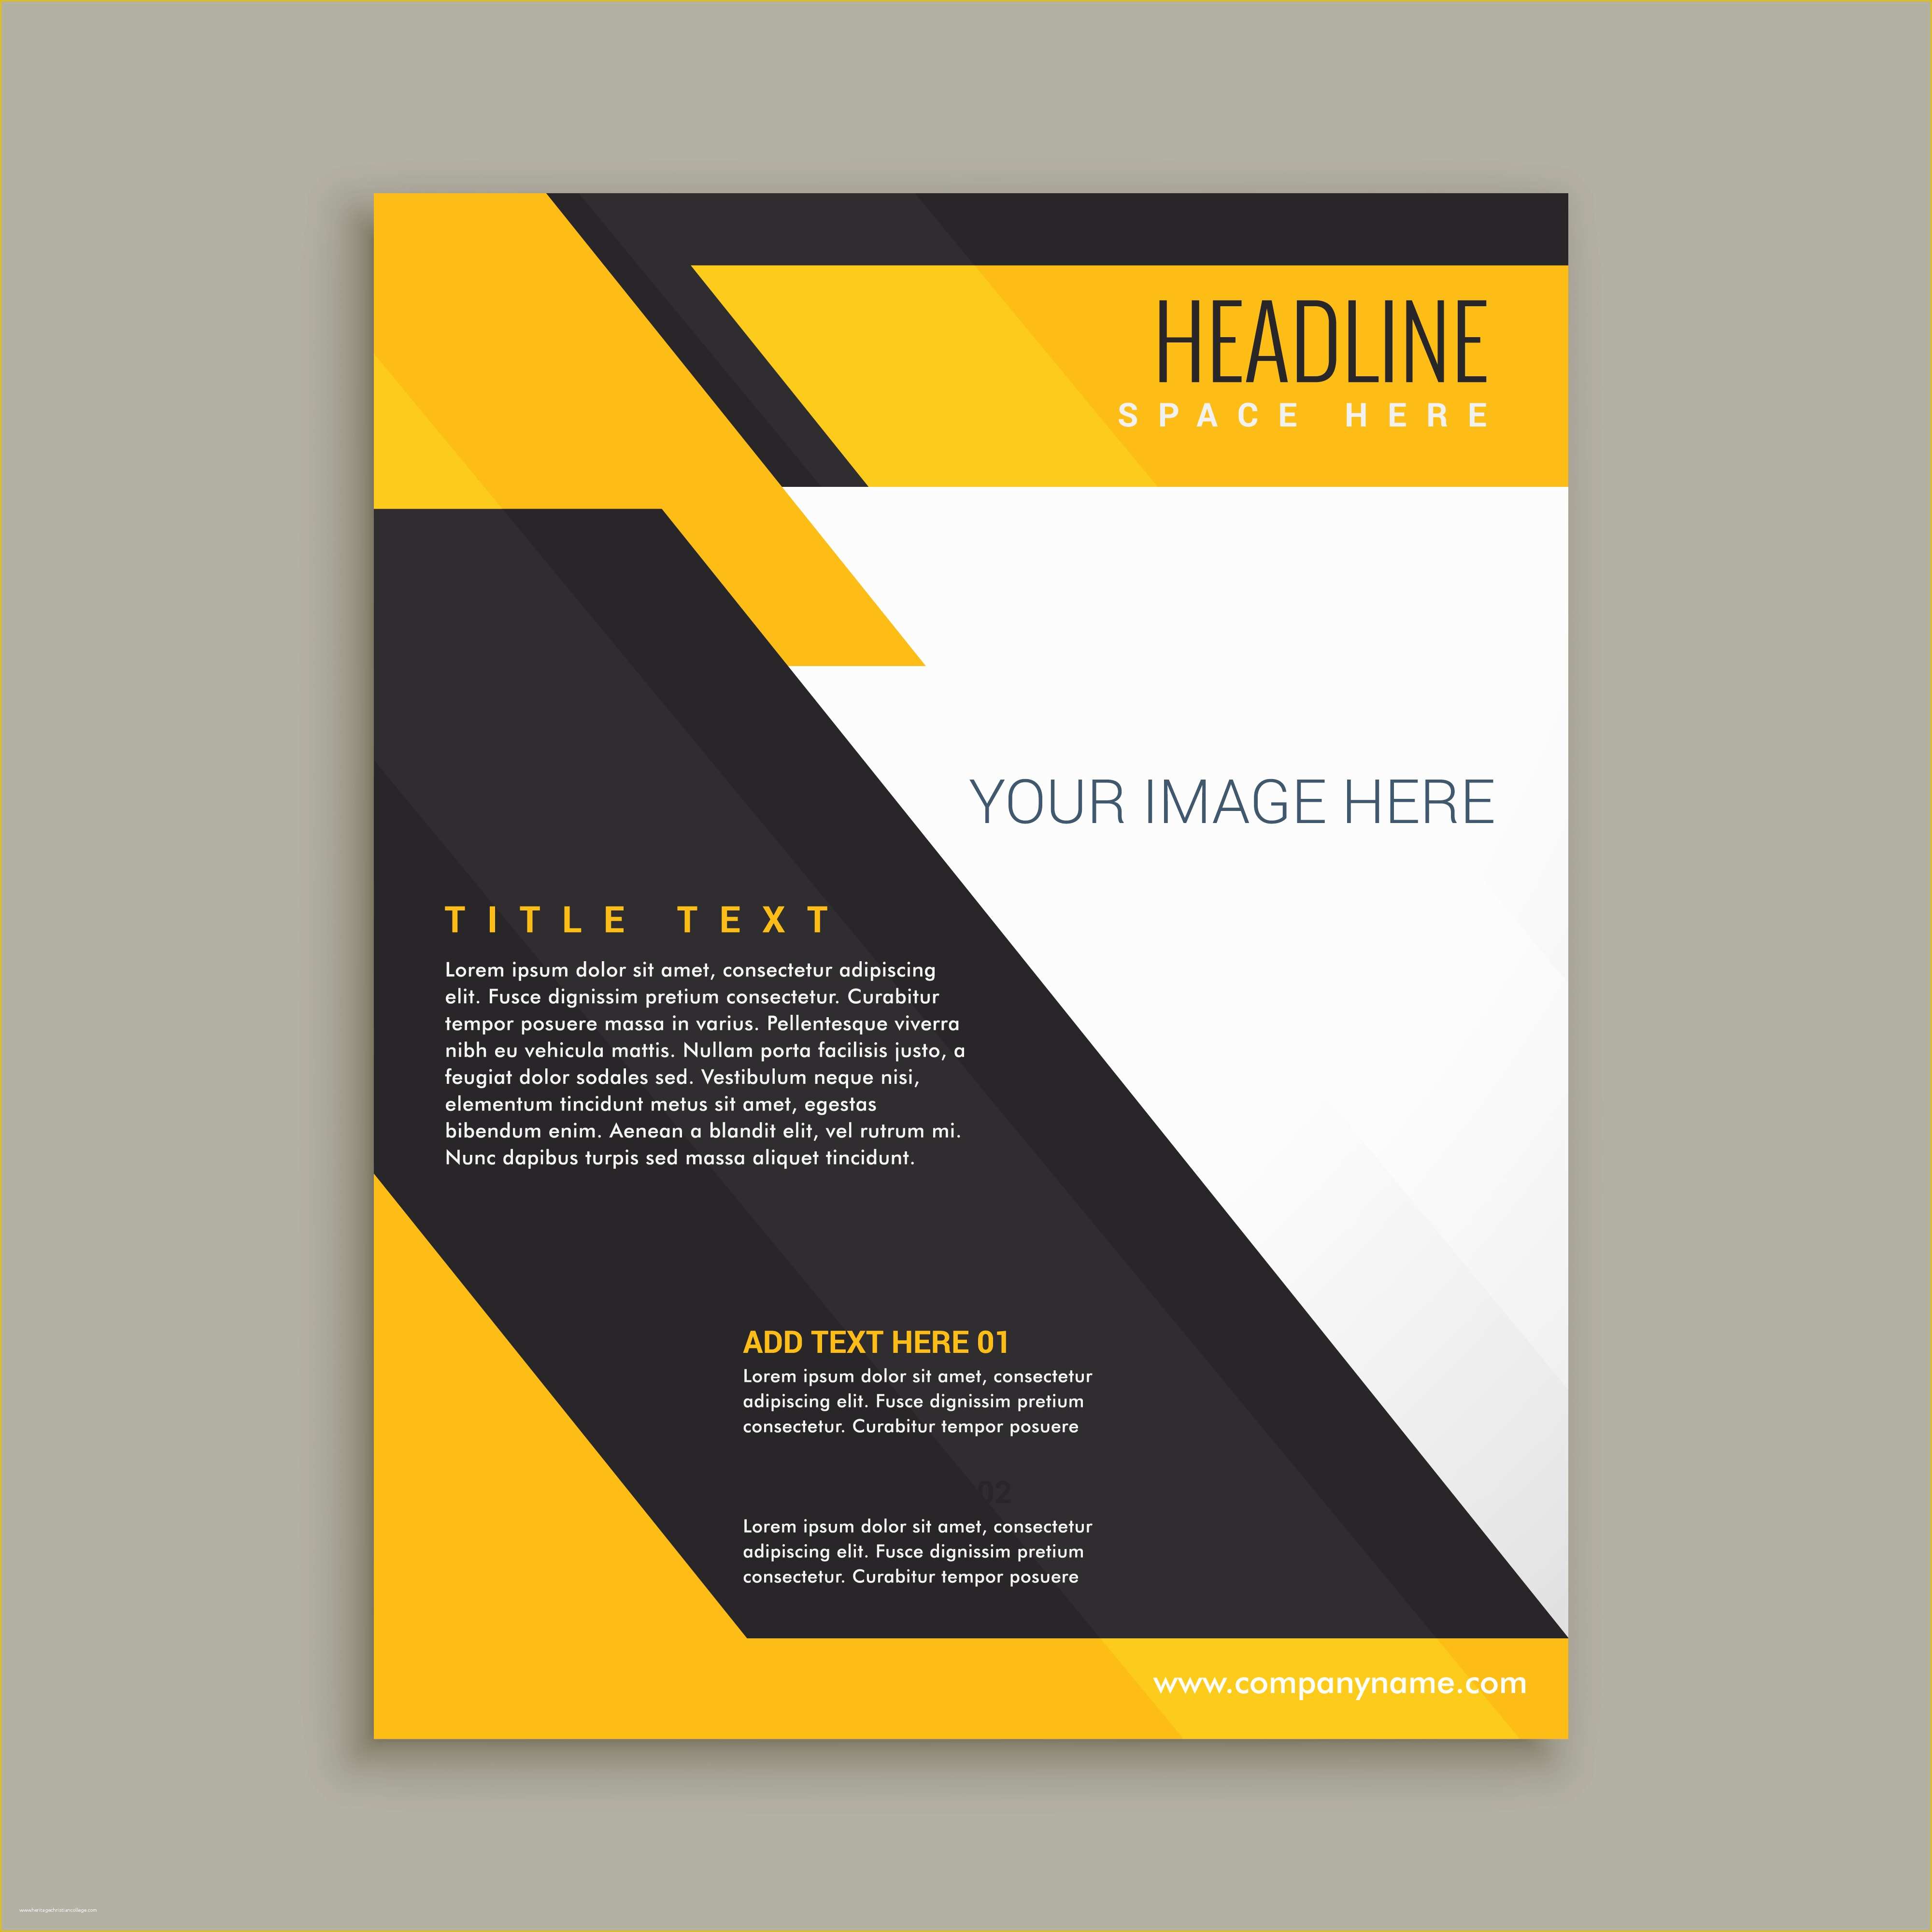 Yellow Pages Website Template Free Download Of Yellow and Black Business Brochure Poster Download Free